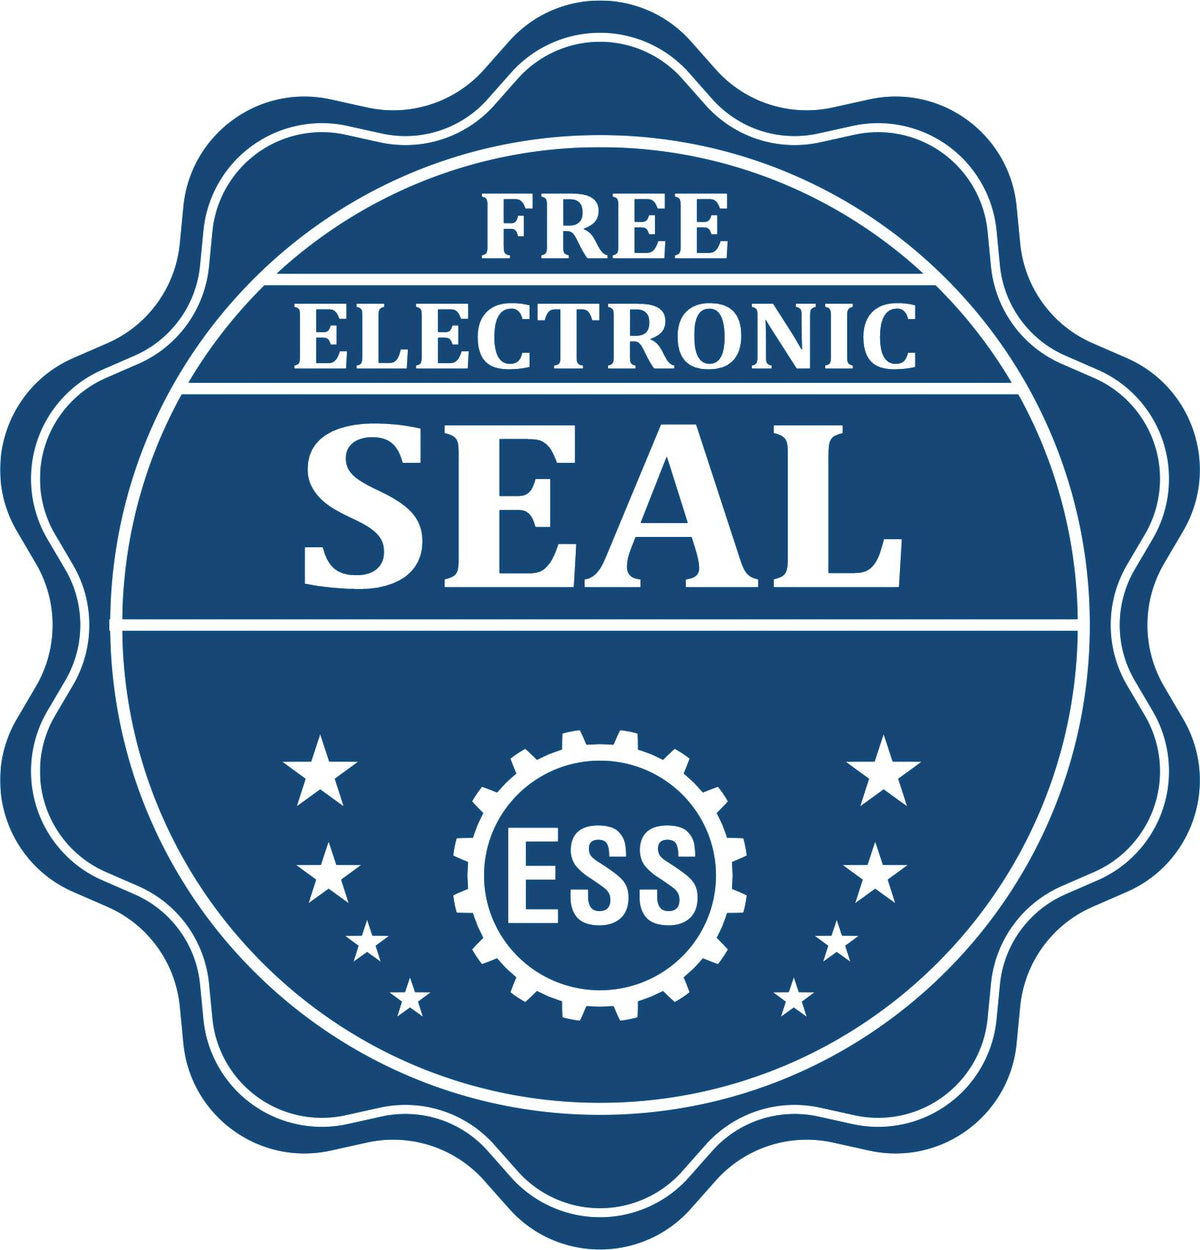 A badge showing a free electronic seal for the Long Reach Idaho PE Seal with stars and the ESS gear on the emblem.